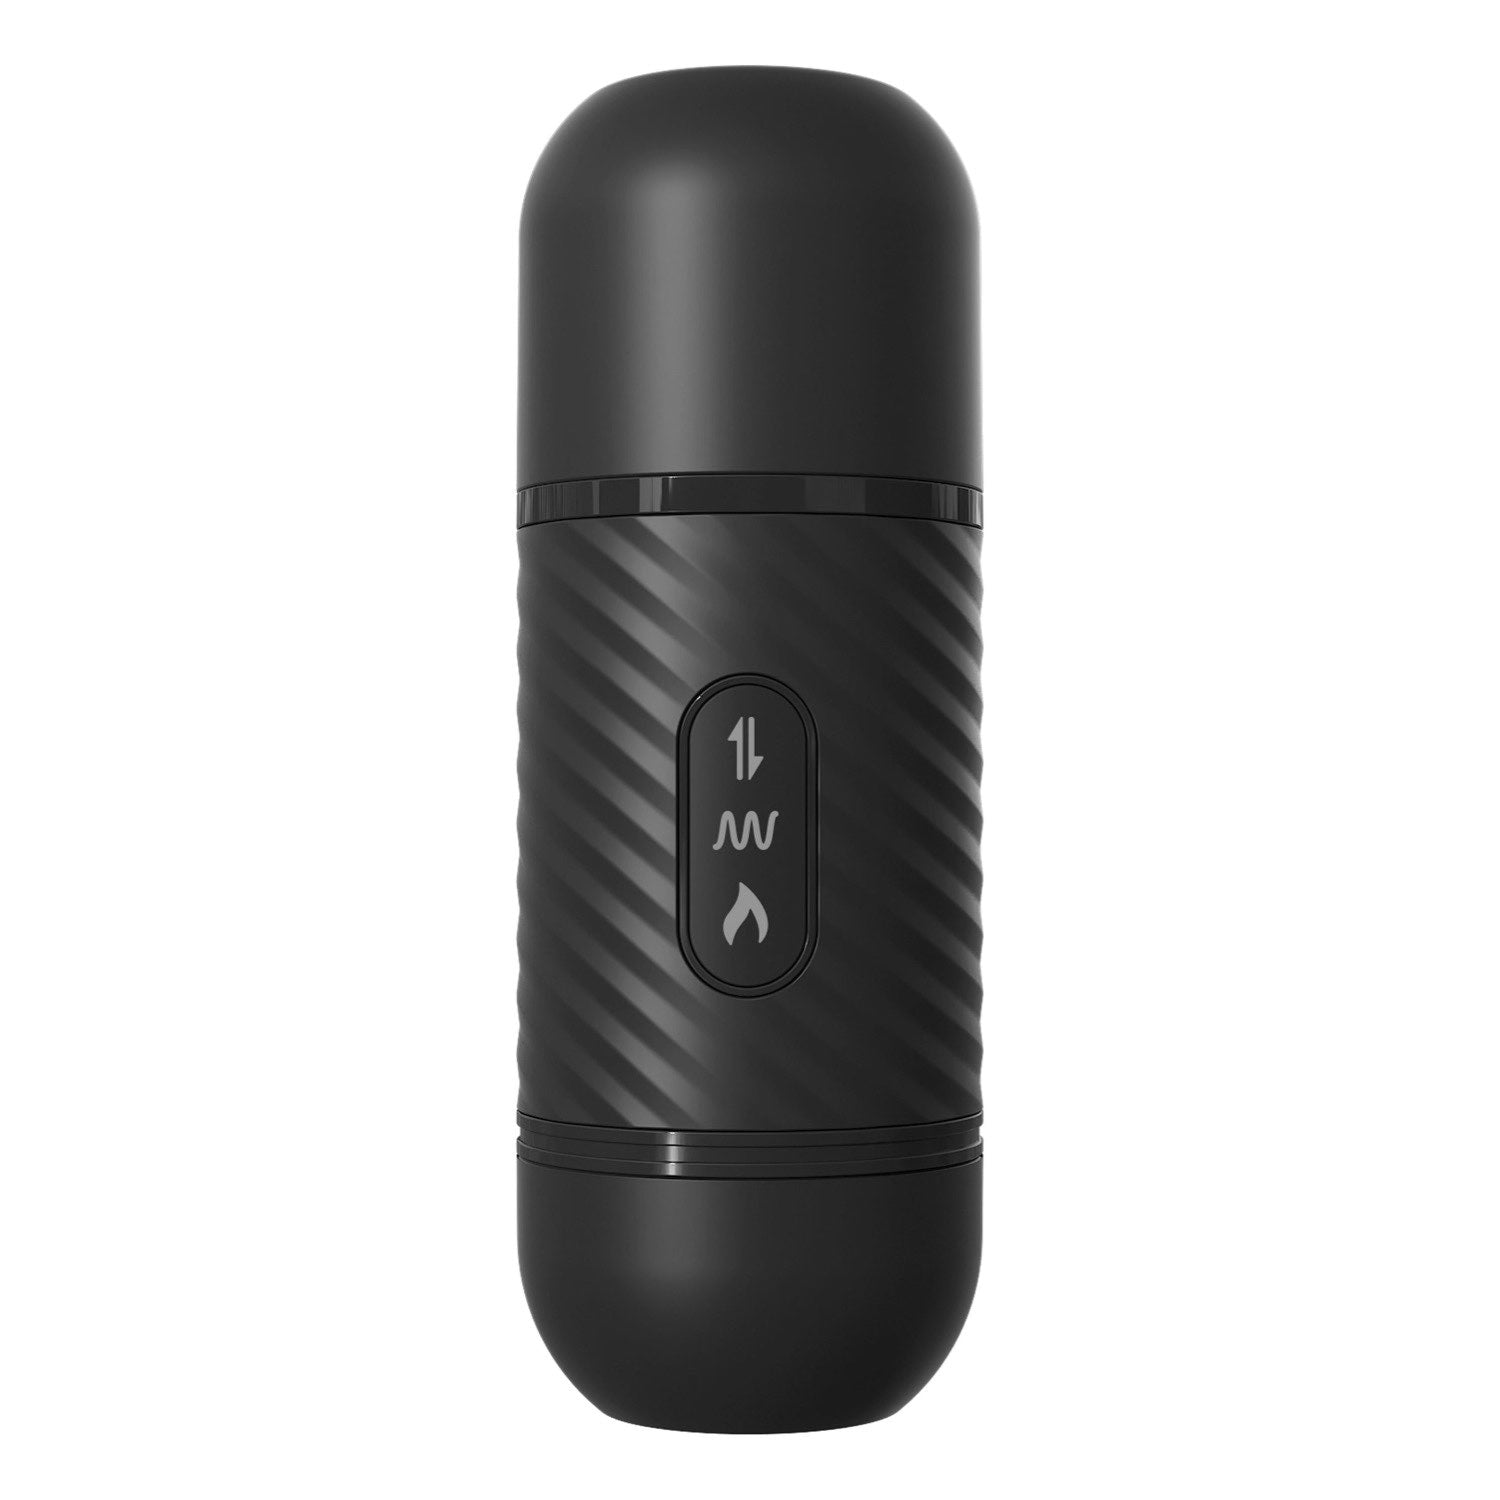 Anal Fantasy Elite Collection Vibrating Ass Thruster - Black USB Rechargeable Vibrating &amp; Thrusting Anal Vibrator by Pipedream